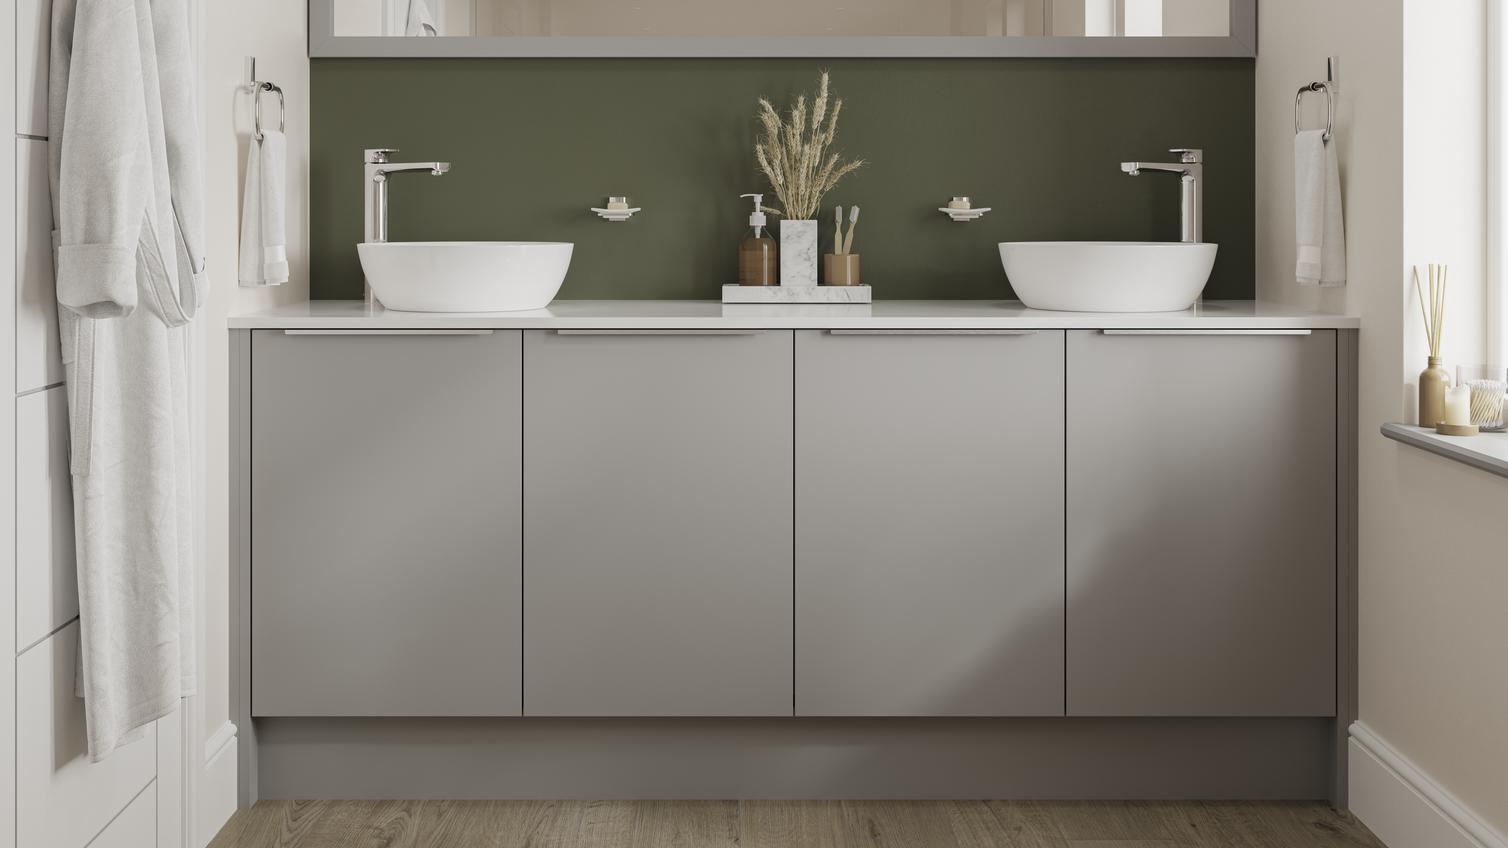 Compact grey bathroom with slab doors in a smooth finish. Includes trimline handles, a white worktop, and dark timber floor.